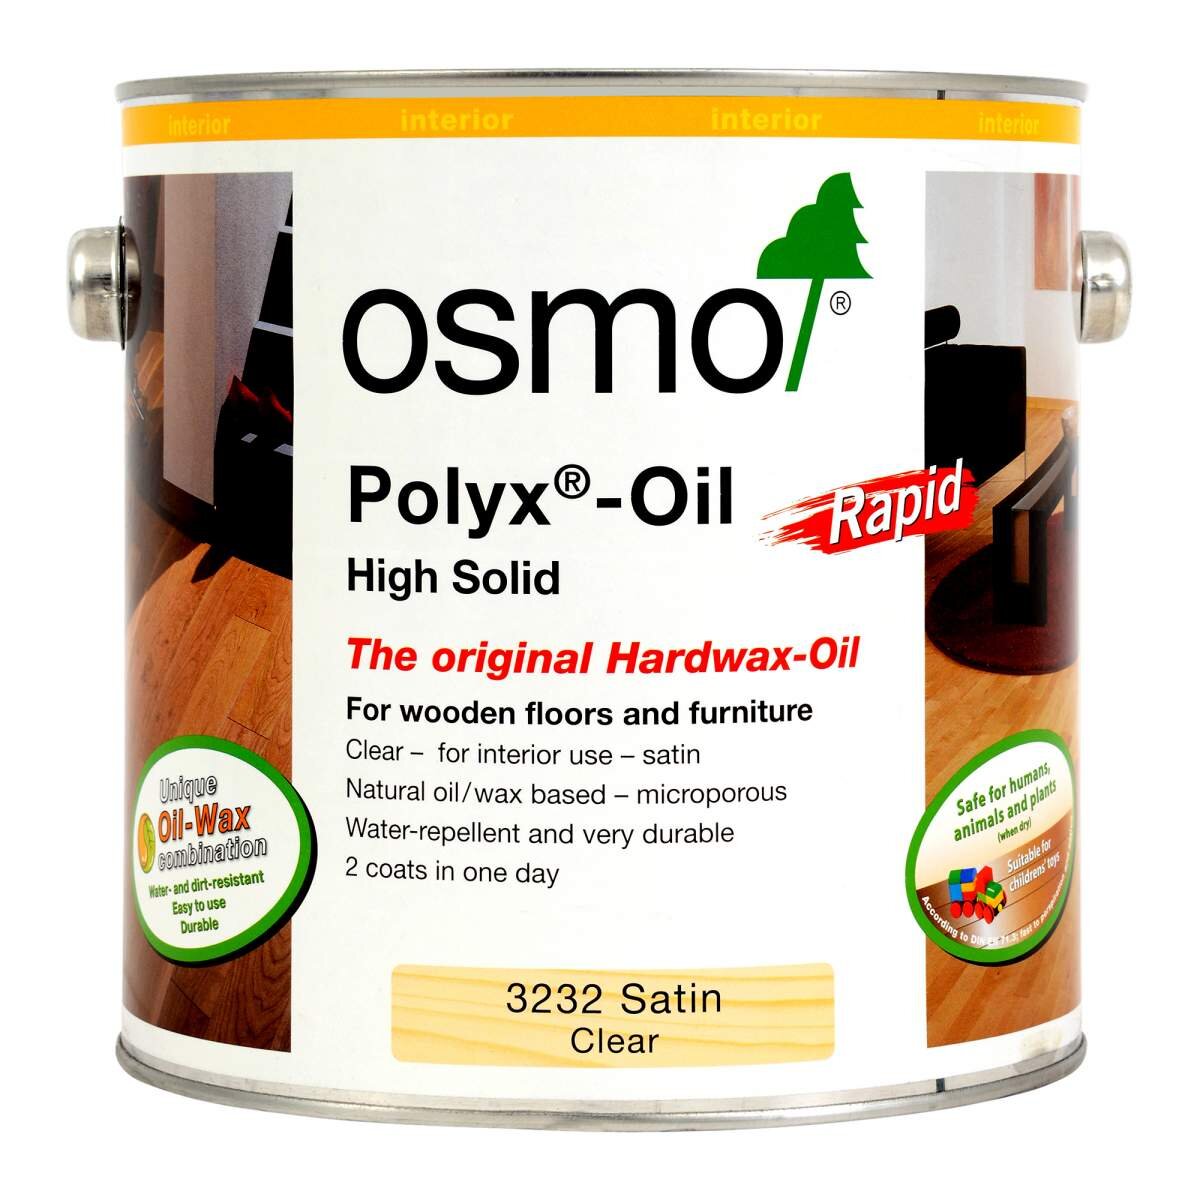 OSMO PolyX-Oil, Rapid Power Tool Services